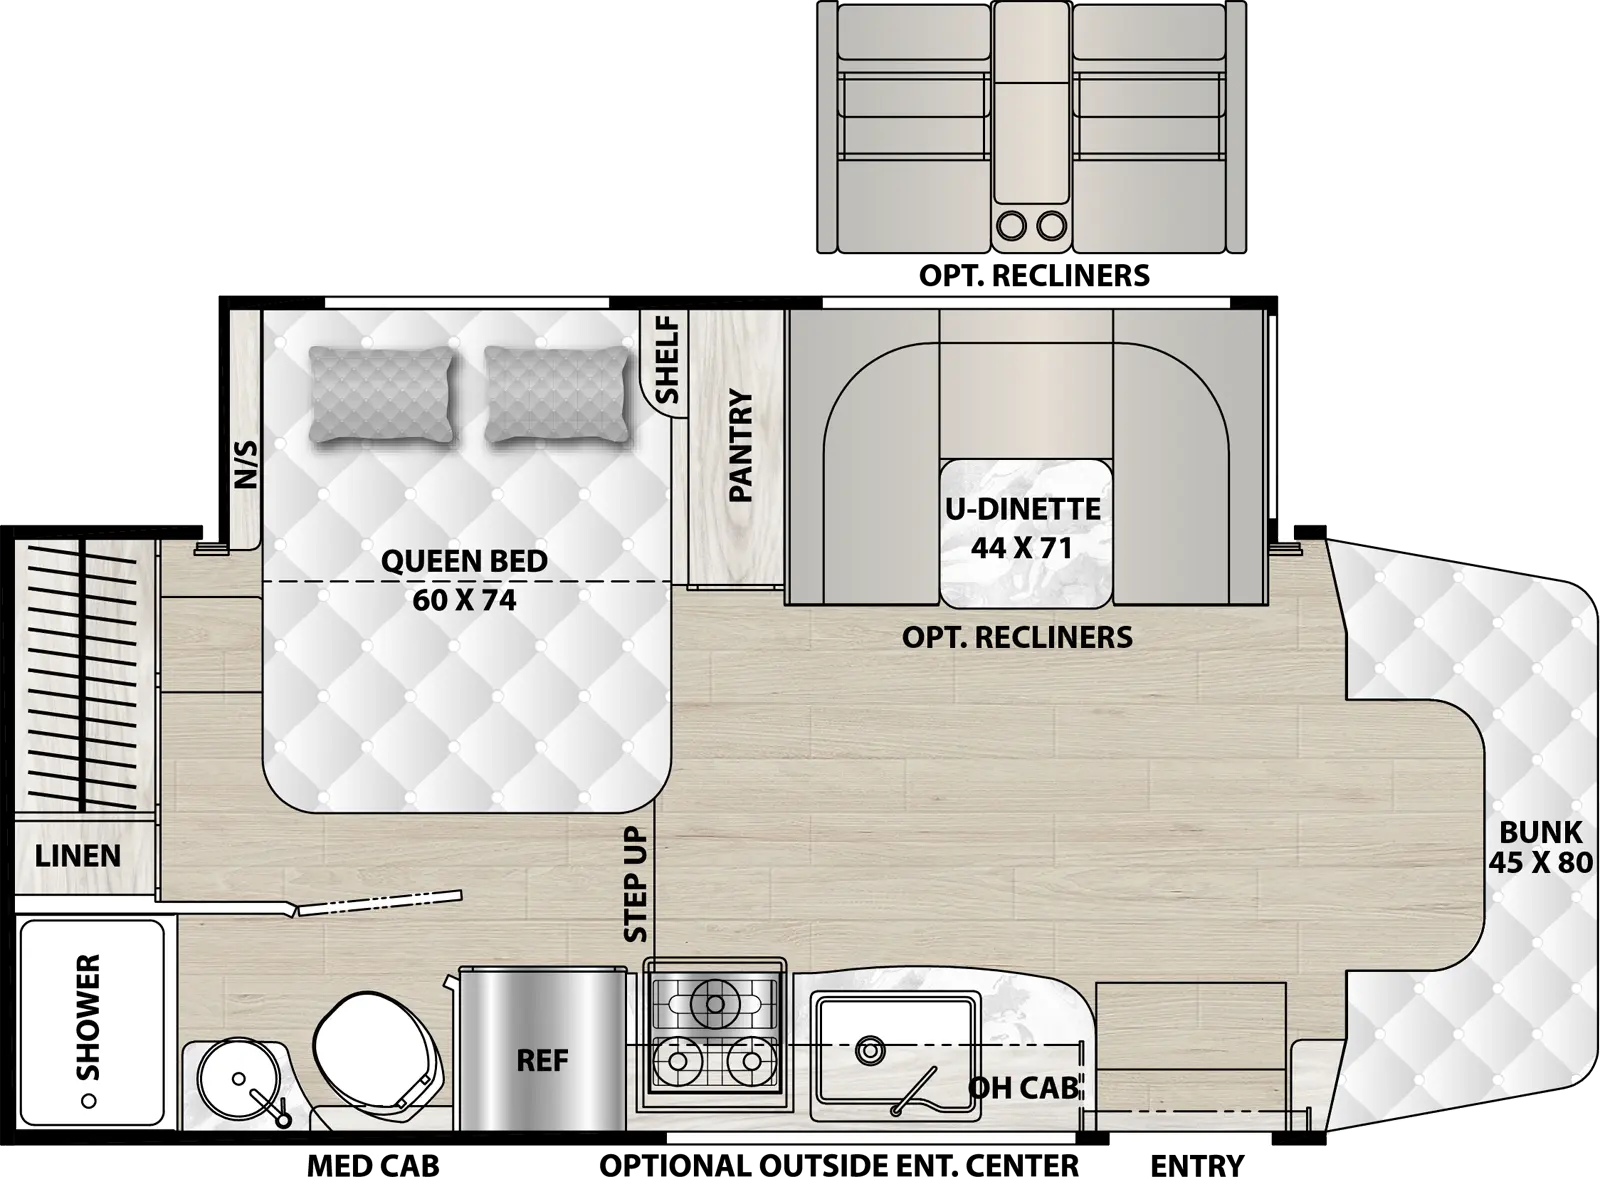 The Prism 24FSE SELECT has 1 slideout located on the off-door side and 1 entry door. Interior layout from front to back; front 45 inch by 80 inch bunk; door side kitchen with stovetop with microwave, overhead cabinets, single sink, and refrigerator; off-door  44 inch by 71 inch U-dinette, next to slide out entertainment center and pantry; step up; rear off-door side 60 inch by 74 inch foot facing full bed with night stand and shelf; rear door side bathroom with shower, sink, toilet, medicine cabinet and linen. Optional Exterior door side entertainment center; optional recliners in place of dinette.